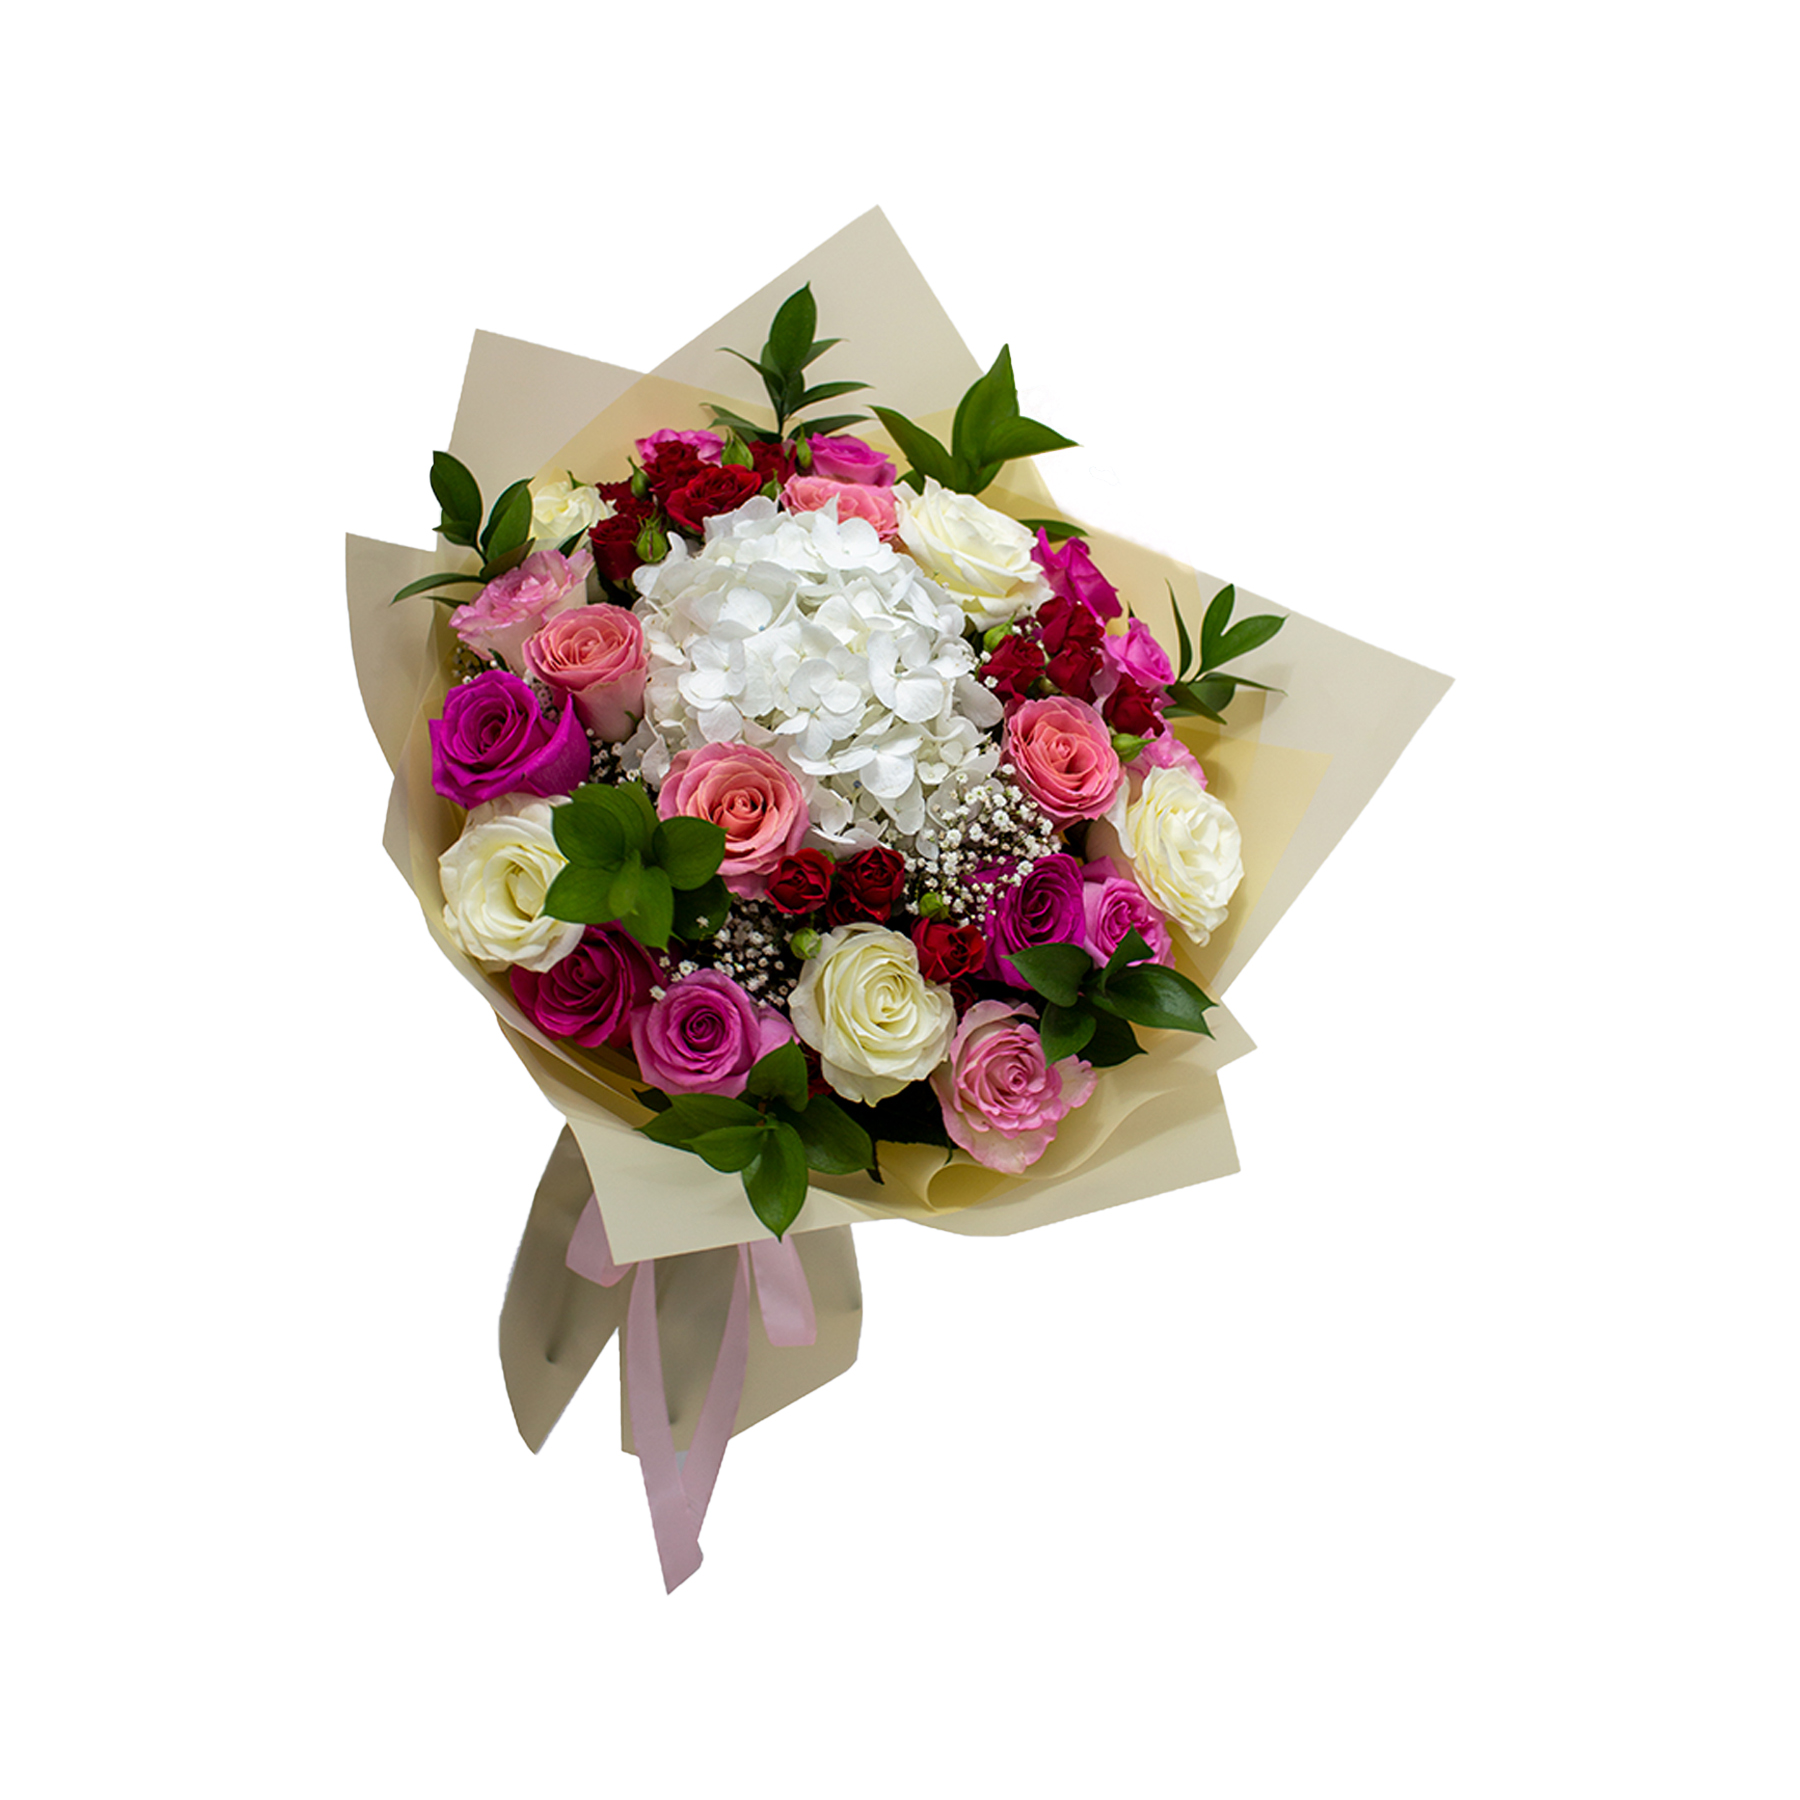 mix-pink-white-red-roses-with-hydrangea2